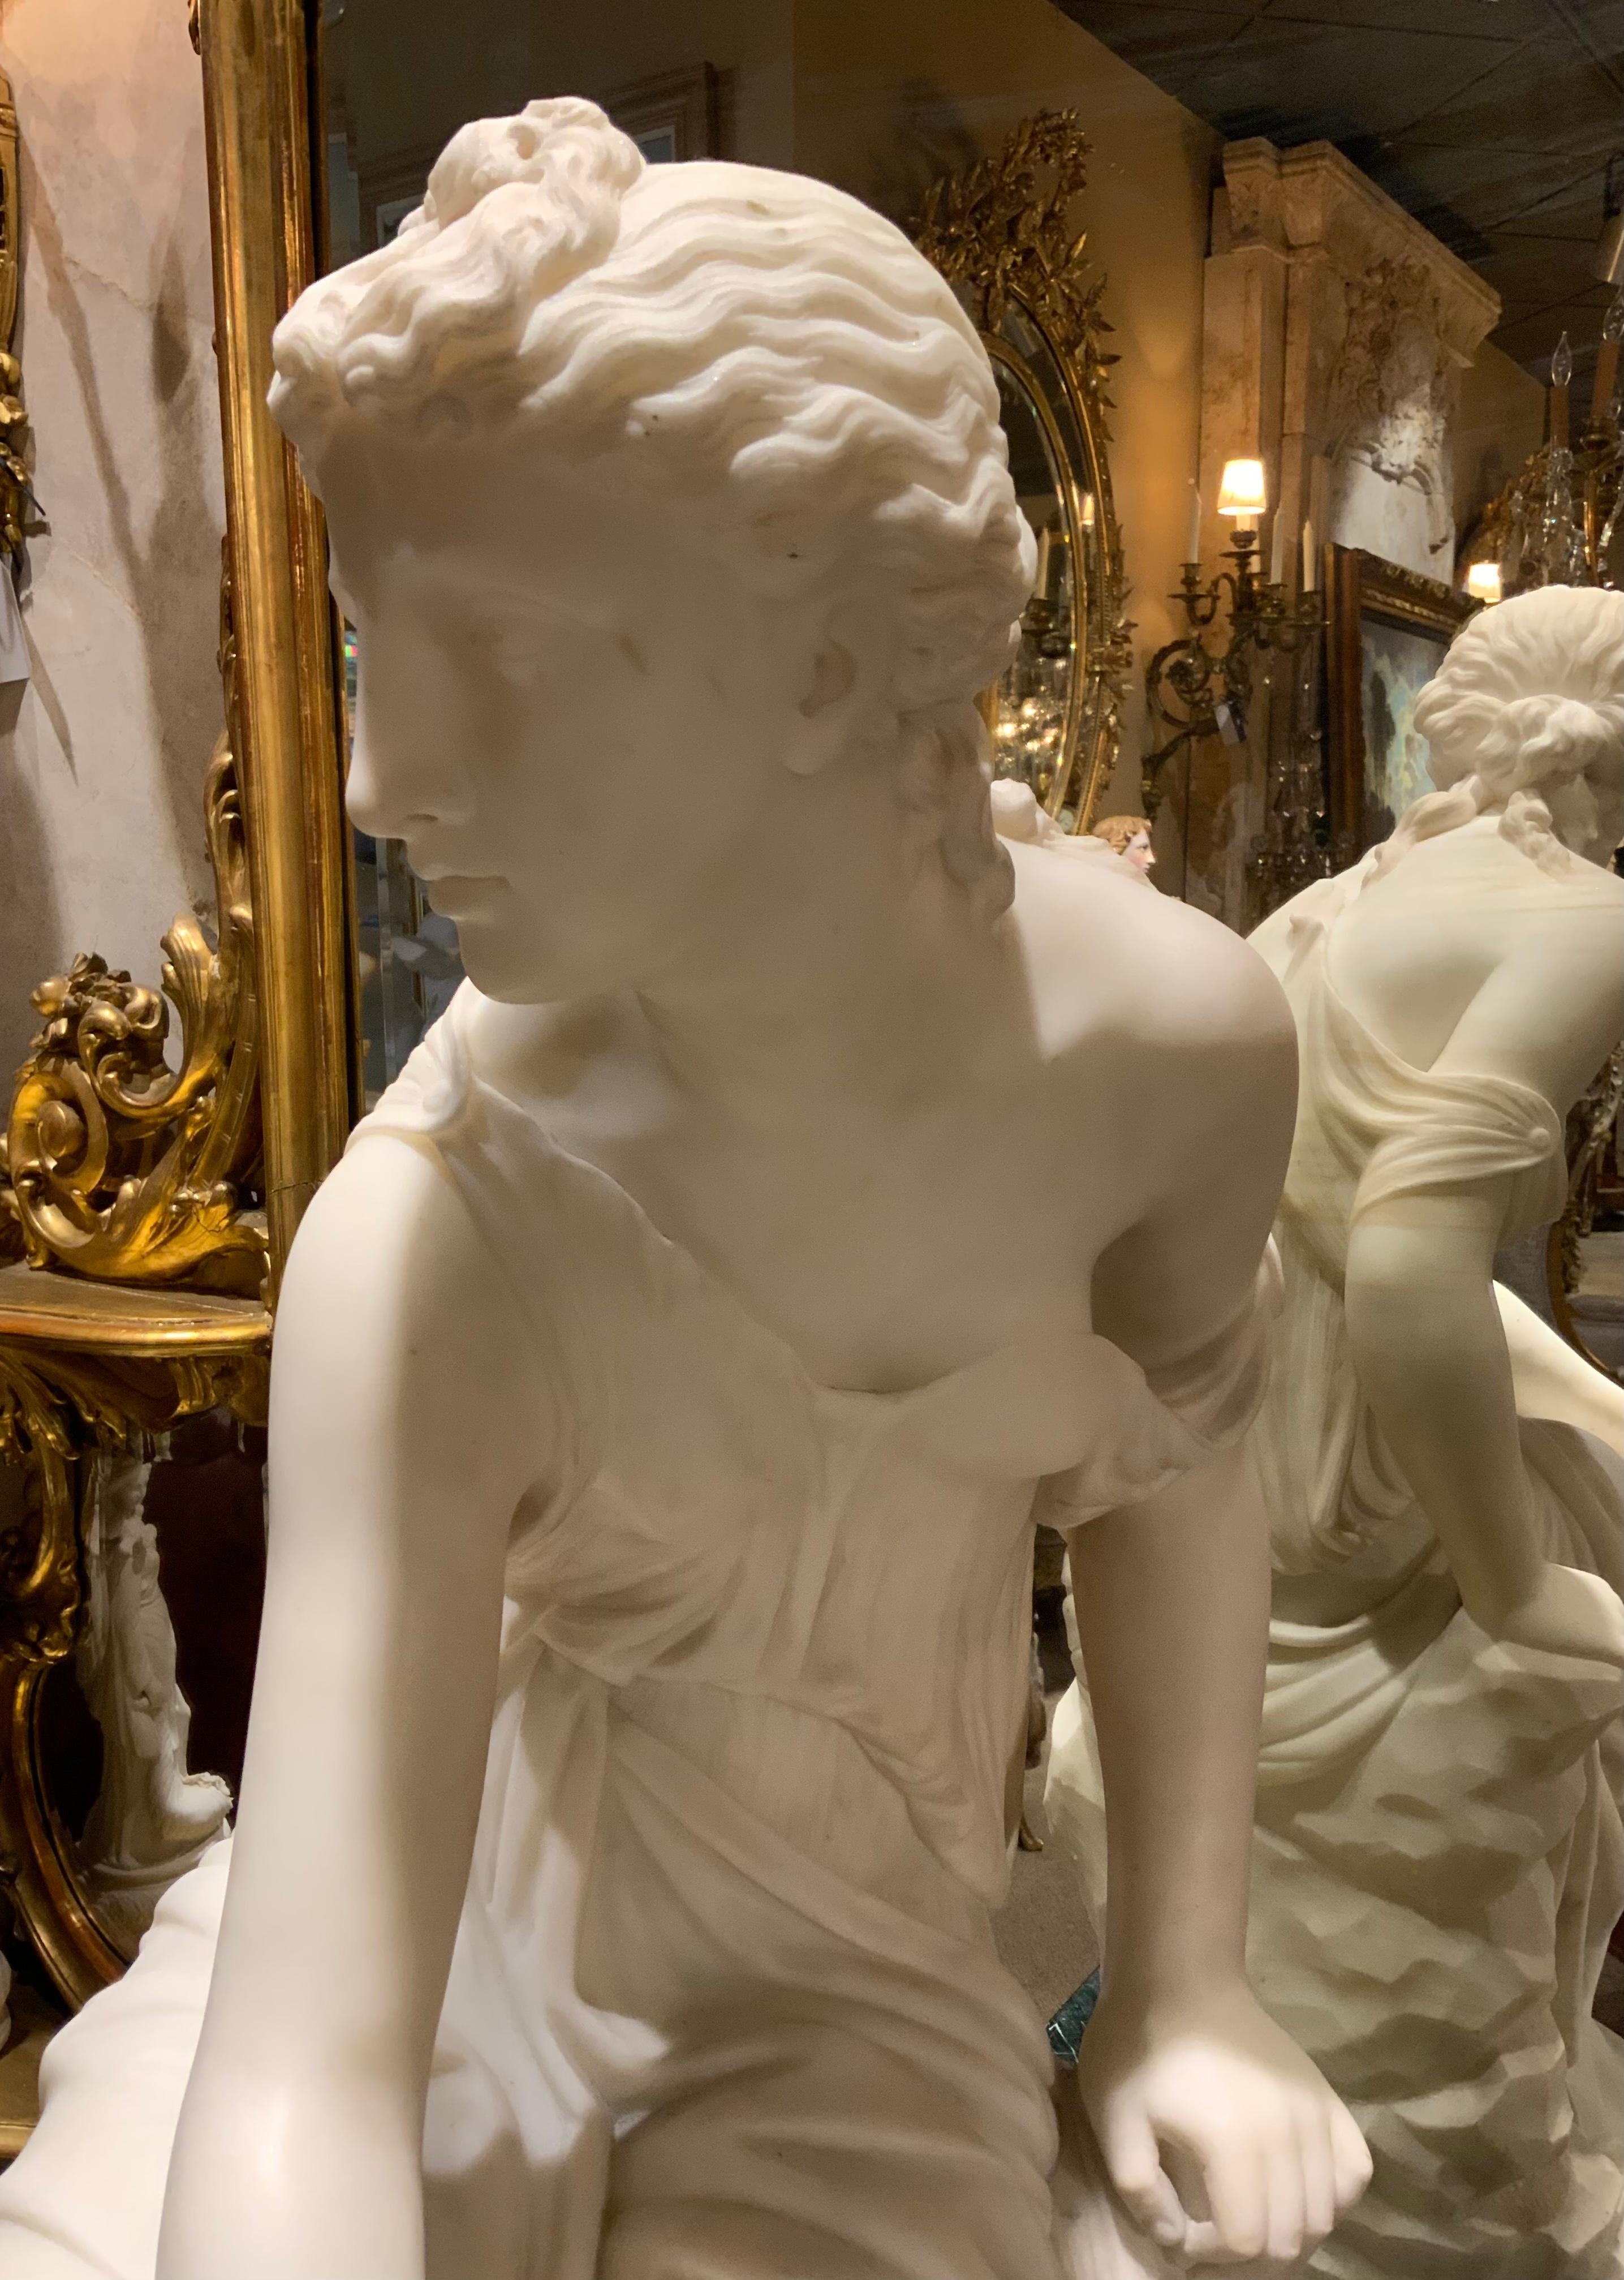 The perfection in the carving technique makes this sculpture very
Special. It is carved from a fine carrara white marble with artistic 
Perfection. The folds in her gown and draping of the garment 
Is exceptional. The features of the face and